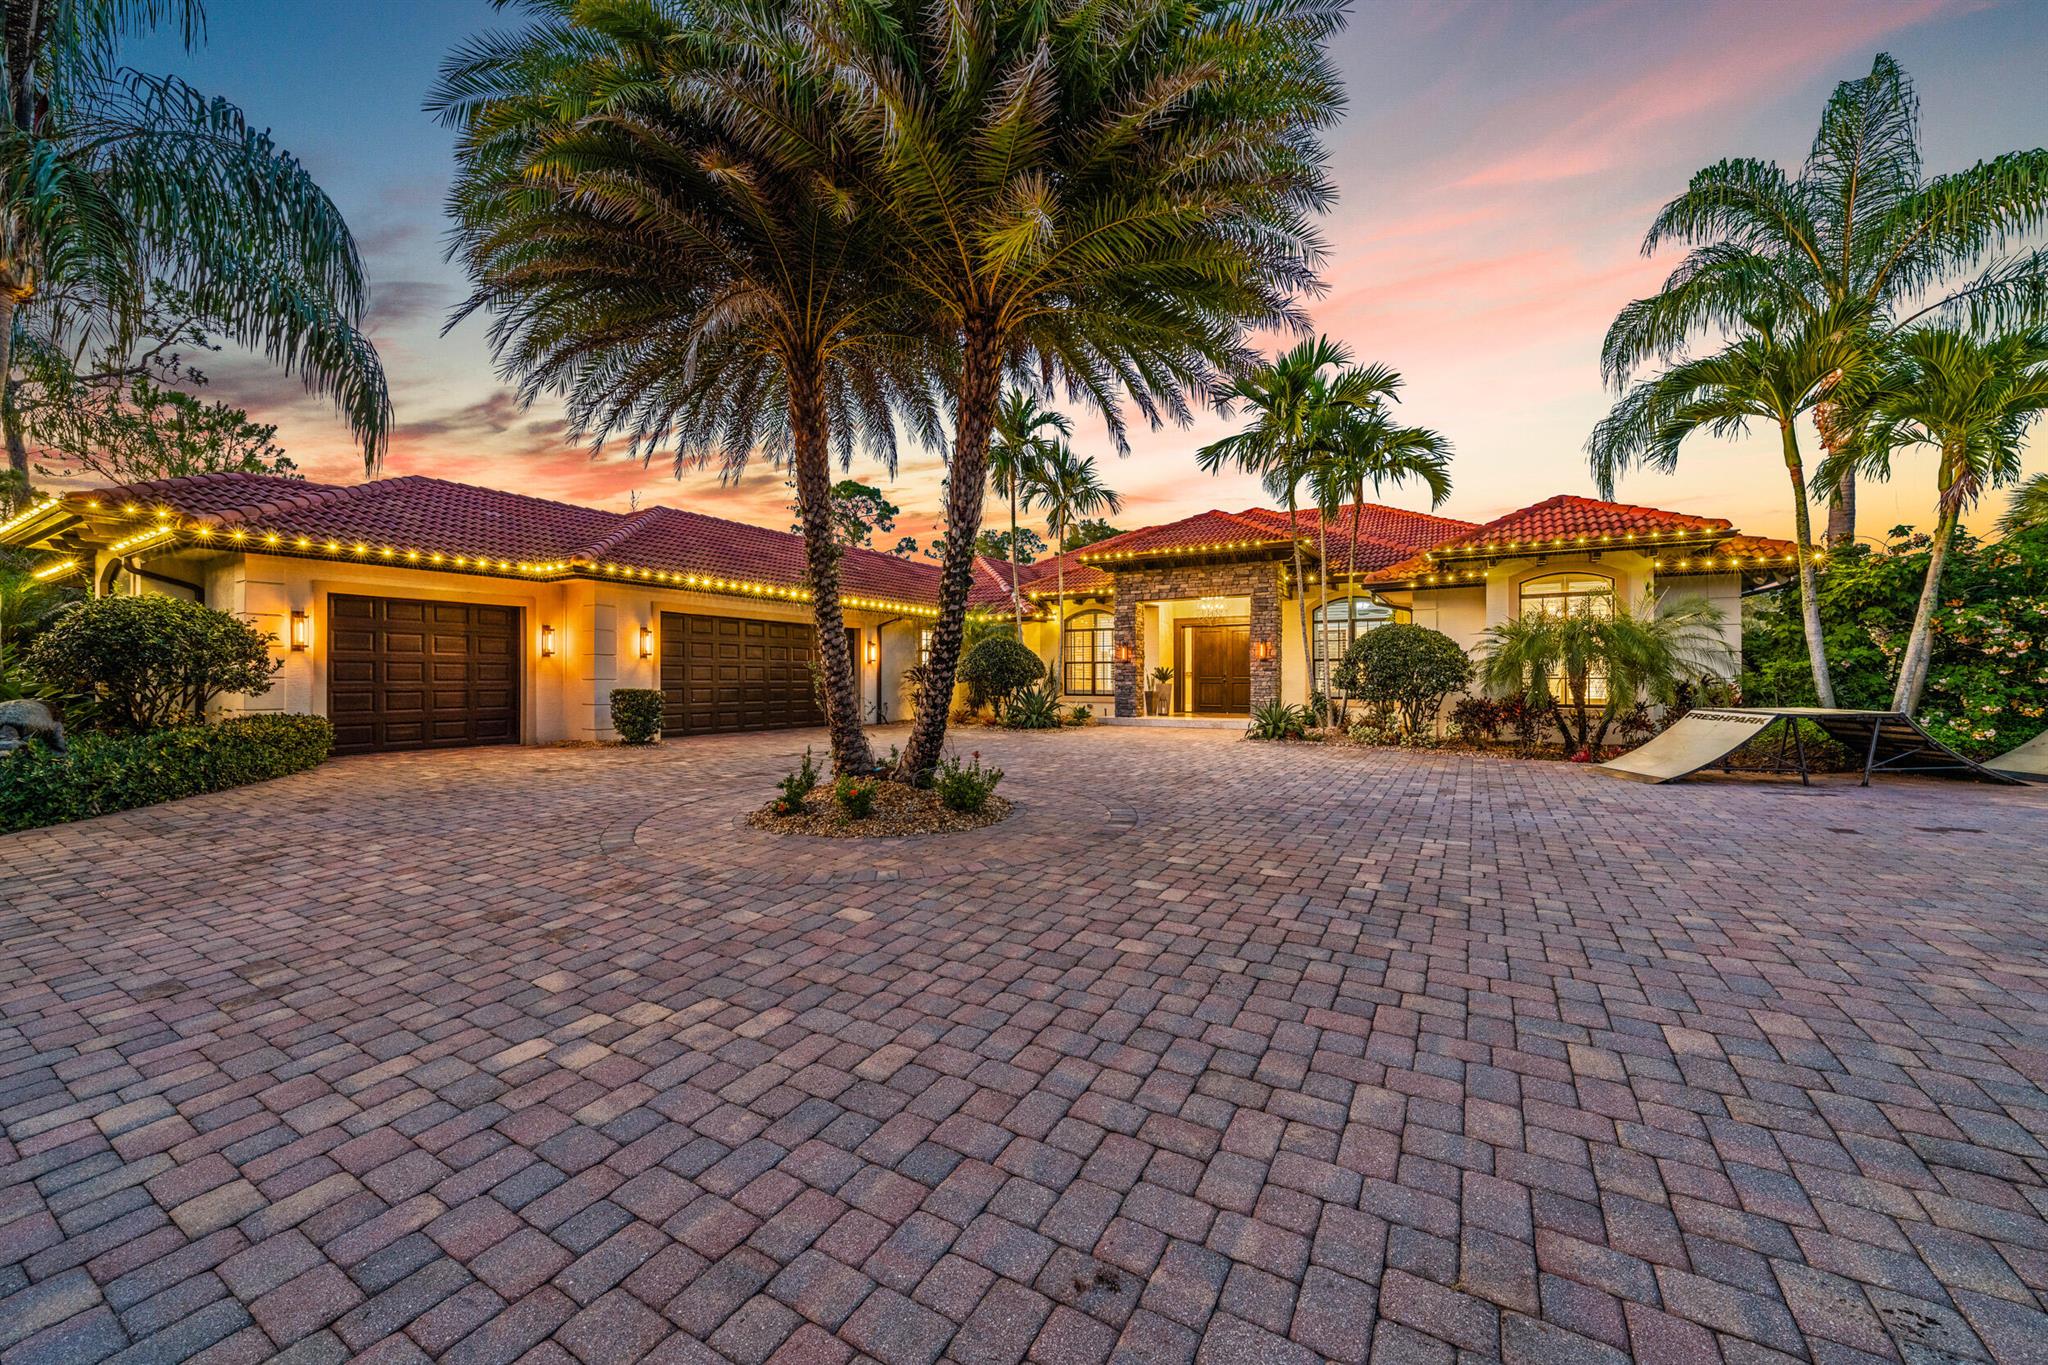 Welcome to a custom-designed paradise, a move-in ready and fully-outfitted waterfront estate priced at $6,425,000 and nestled in the coveted Jupiter zip code while benefitting from Martin County taxes. This magnificent 3-acre property offers unmatched privacy and breathtaking sunsets over Jonathan Dickinson State Park and the Loxahatchee River right from your backyard.Spanning over 6,000+ square feet, the main property features five spacious bedrooms and four well-appointed bathrooms. The home includes a 3-car garage, providing plenty of storage and parking, and a 1,200 sqft private gym equipped with a cold plunge for post-workout recovery. The expansive living areas are designed with impact glass throughout, ensuring safety and comfort. Additionally, the property is equipped with a one-year-old full-house Briggs &amp; Stratton generator, ensuring uninterrupted power supply.
Outdoors, the spa-inspired backyard boasts a luxurious pool, swim spa, and fire pit, perfect for entertaining family and friends. Enjoy direct access to the Intracoastal with a private dock, two floating boat slips, and four jet ski floating docks. The property also includes a boat launch, accommodating up to a 41-foot center console boat with a recently dredged canal, and is ready for an RV with septic, full water, and electrical hookups.The recently remodeled and updated kitchen is ideal for hosting gatherings, while the two entrances to the property offer flexibility for additional structures such as a large car garage or guest house. Located just minutes from Jupiter and Tequesta, this estate provides easy access to numerous retail amenities, deep-sea fishing, water sports, fine dining, diving, tennis, and world-renowned golf courses. With close proximity to I-95 and the Turnpike, this home offers both tranquility and convenience.This spectacular estate is a rare find, offering a blend of luxury, privacy, and convenience. Don't miss the opportunity to own a piece of paradise in one of Florida's most sought-after locations.